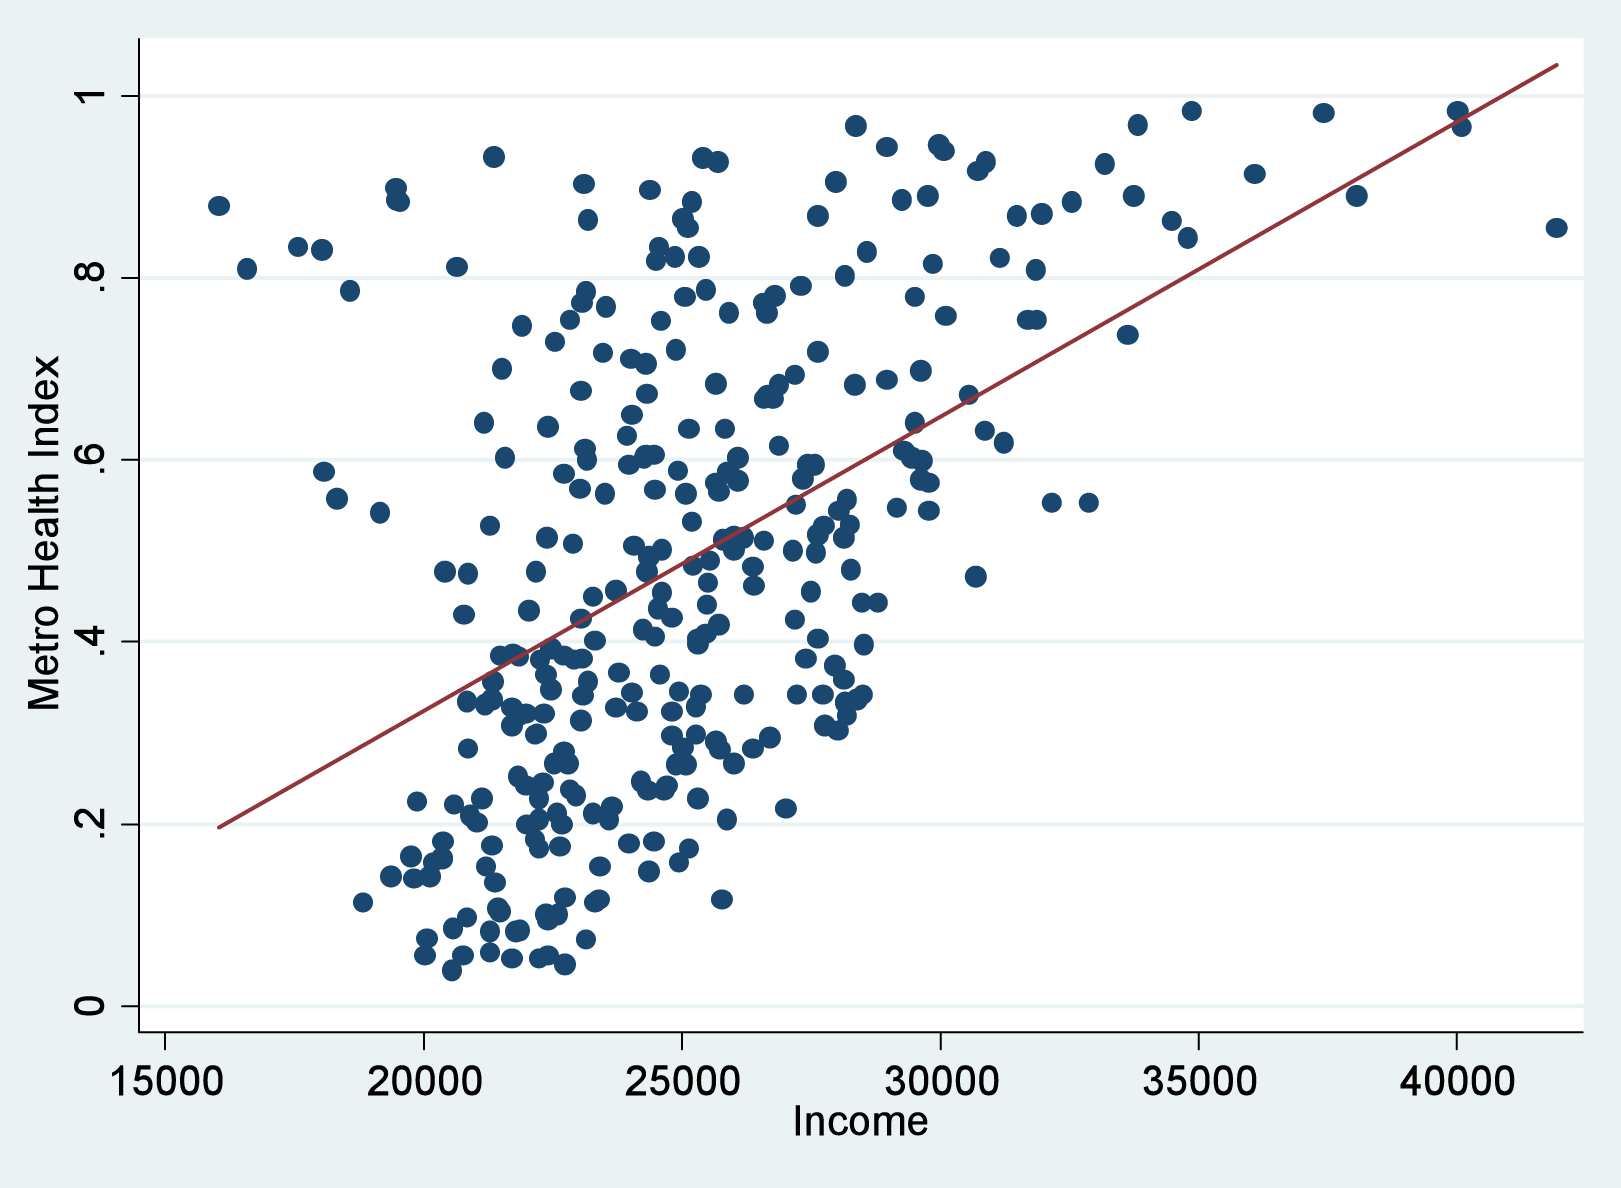 research study that uses scatterplots